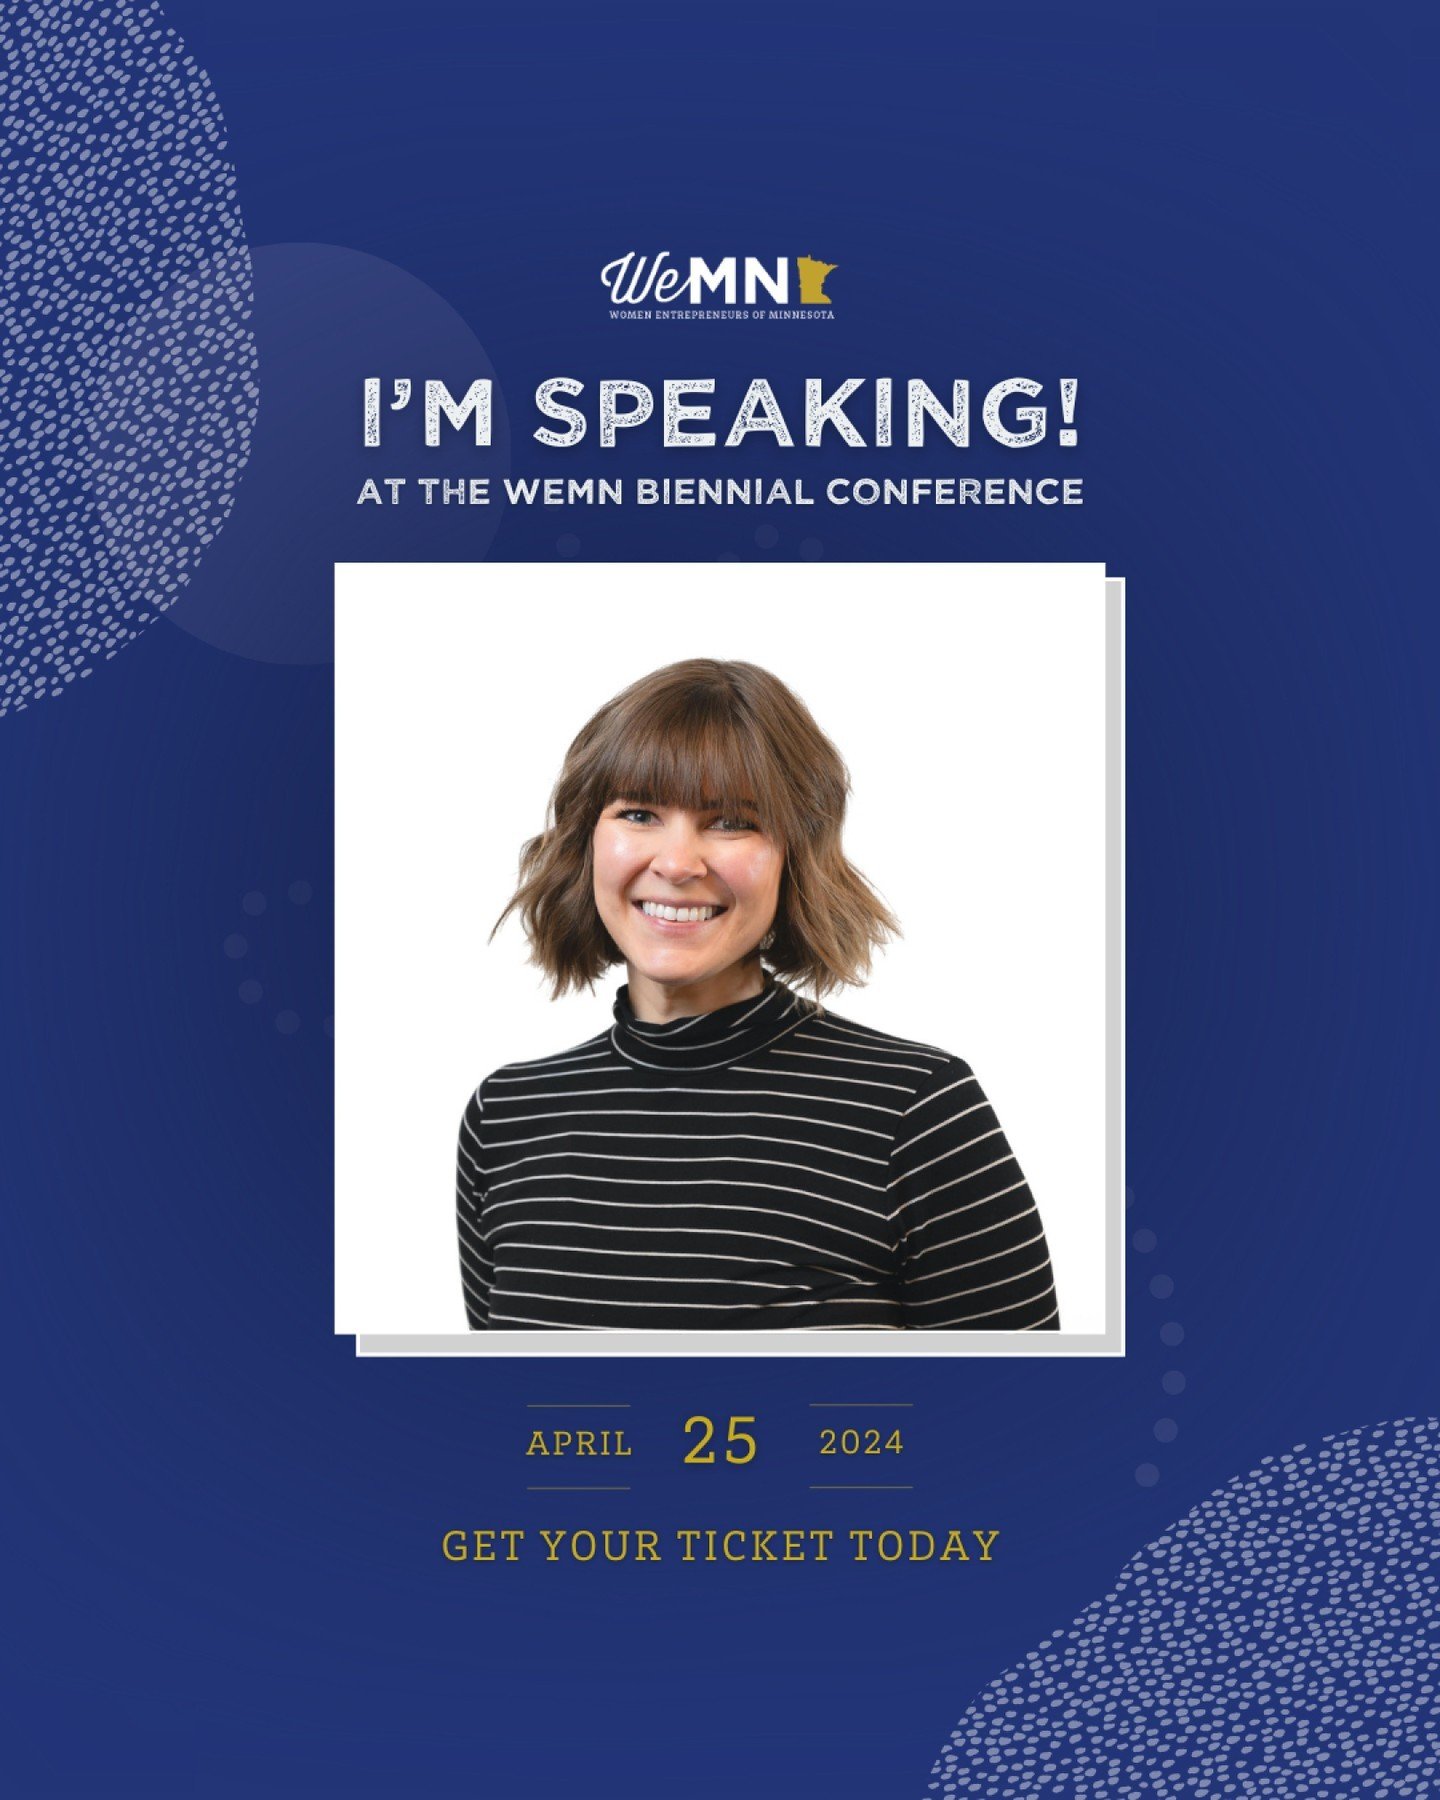 📸 Exciting news! I'll be speaking at the WeMN biennial conference on April 25th at @PinstripesBBB in Edina! 🎉 I'm thrilled to be part of a panel to share how community has played a vital role in my journey as business owner. From building relations